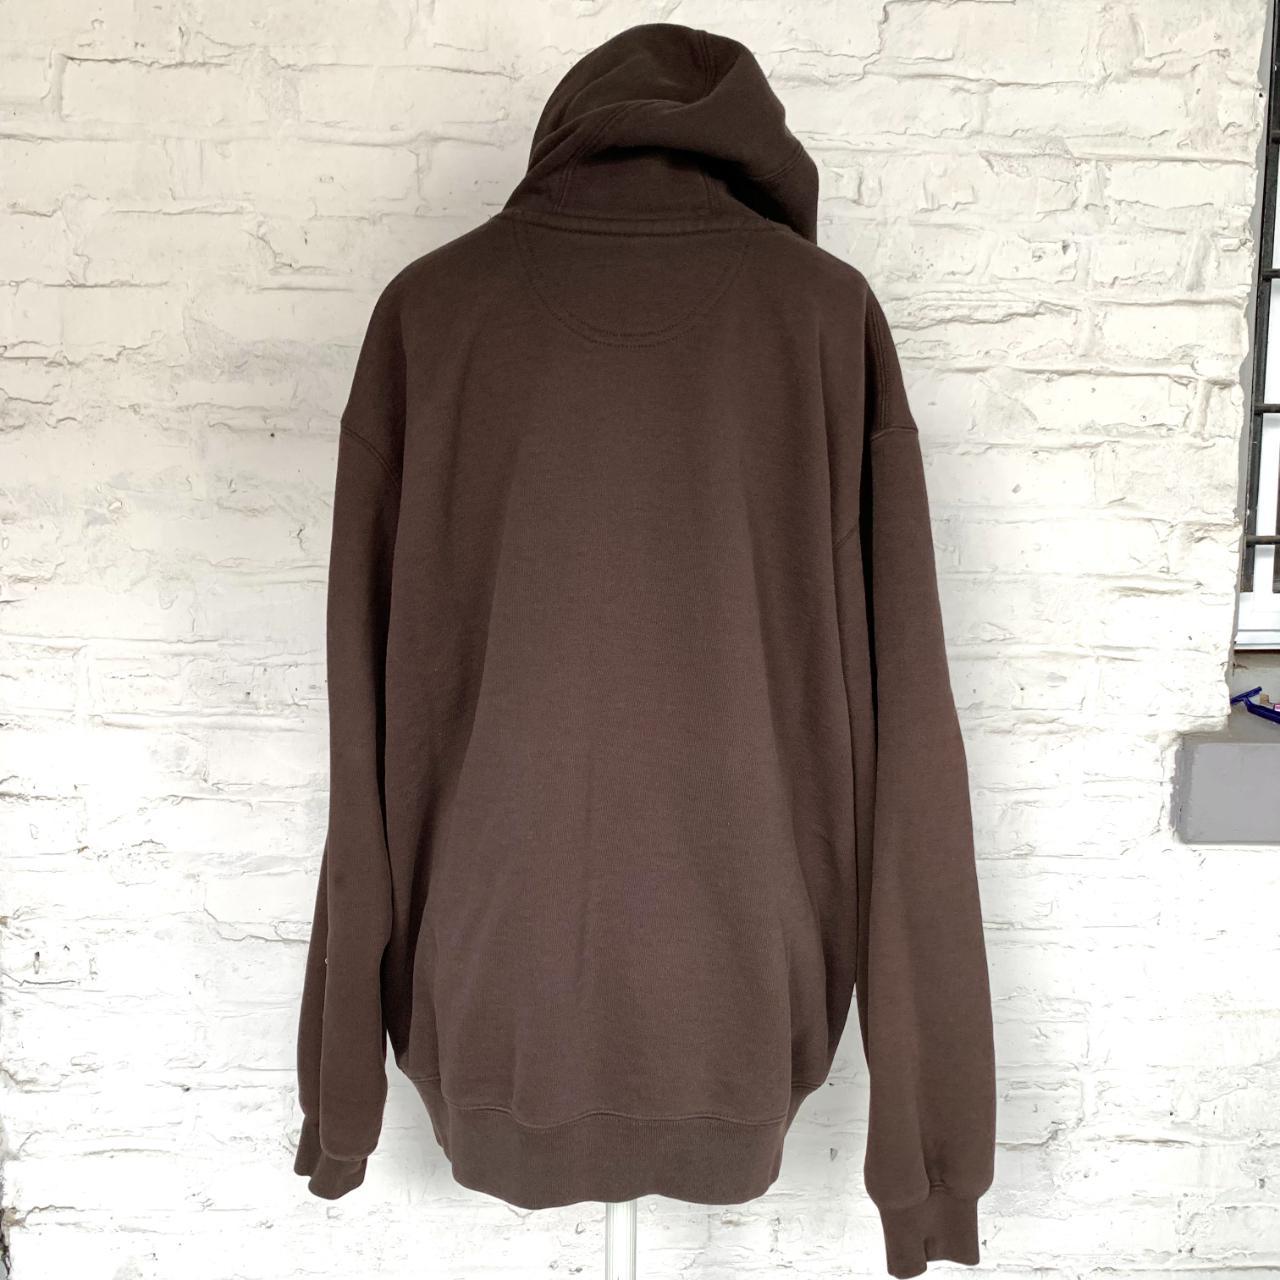 Product Image 2 - Carhartt hoodie, brown, pullover, logo